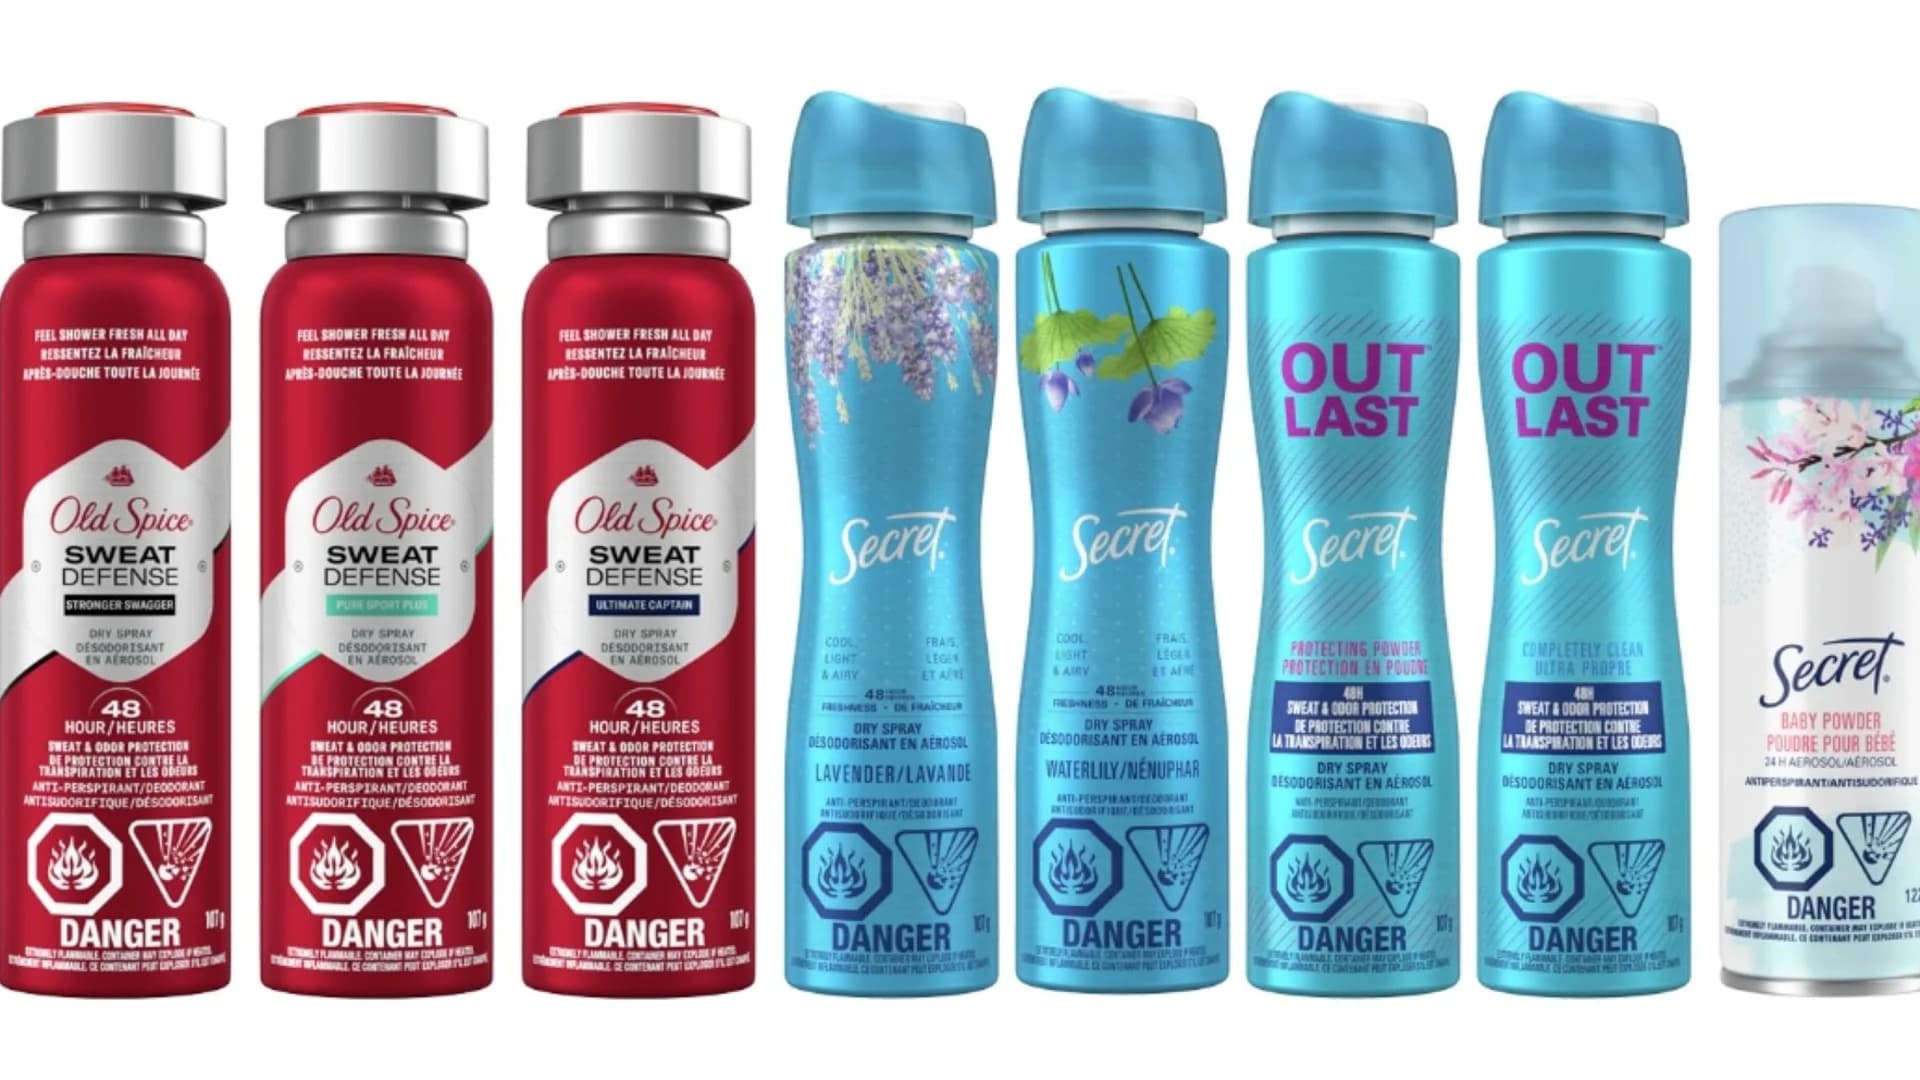 P&G recall several deodorants after benzene detected